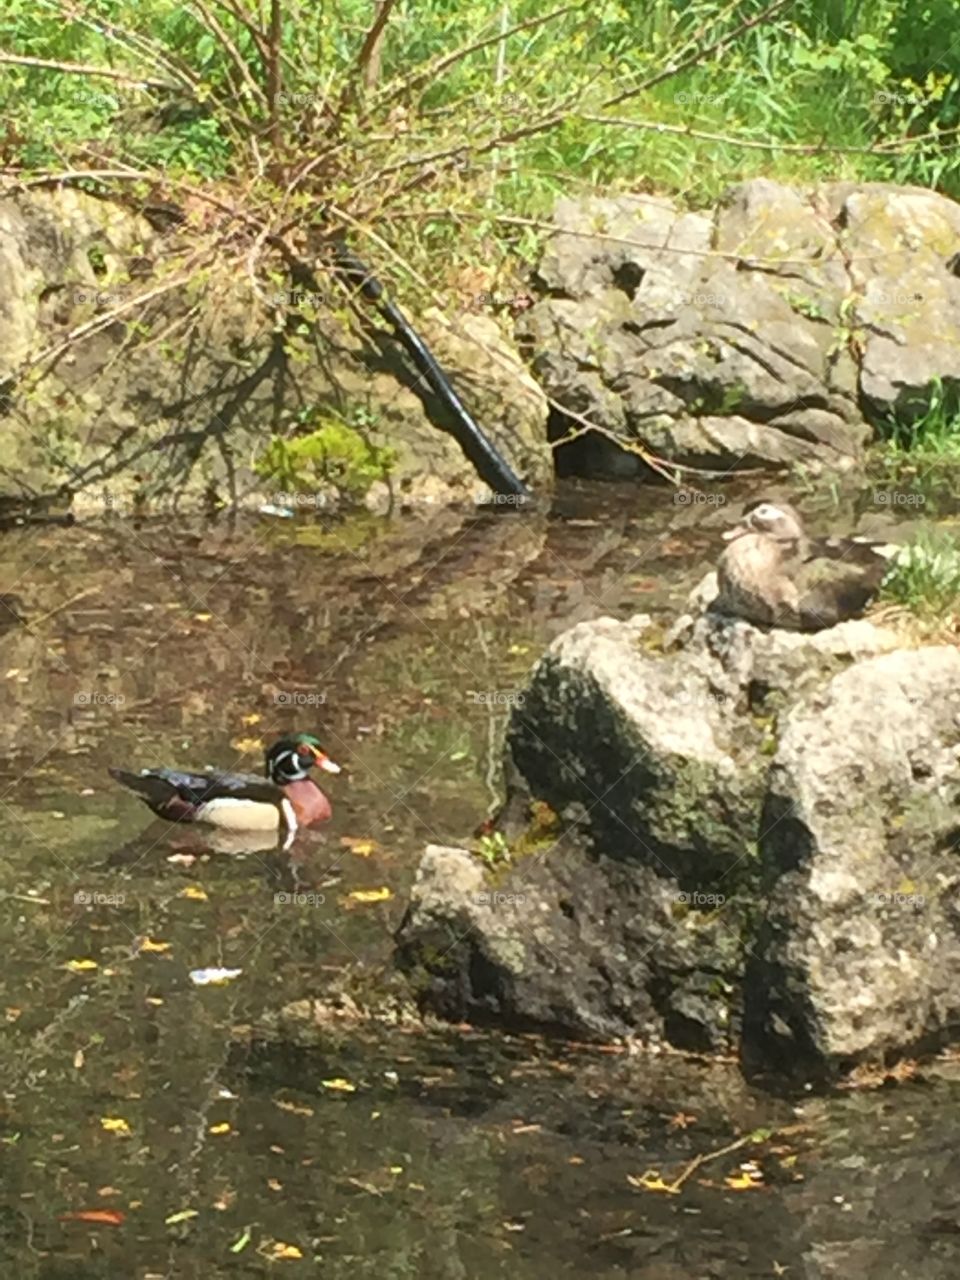 Ducks in the pond